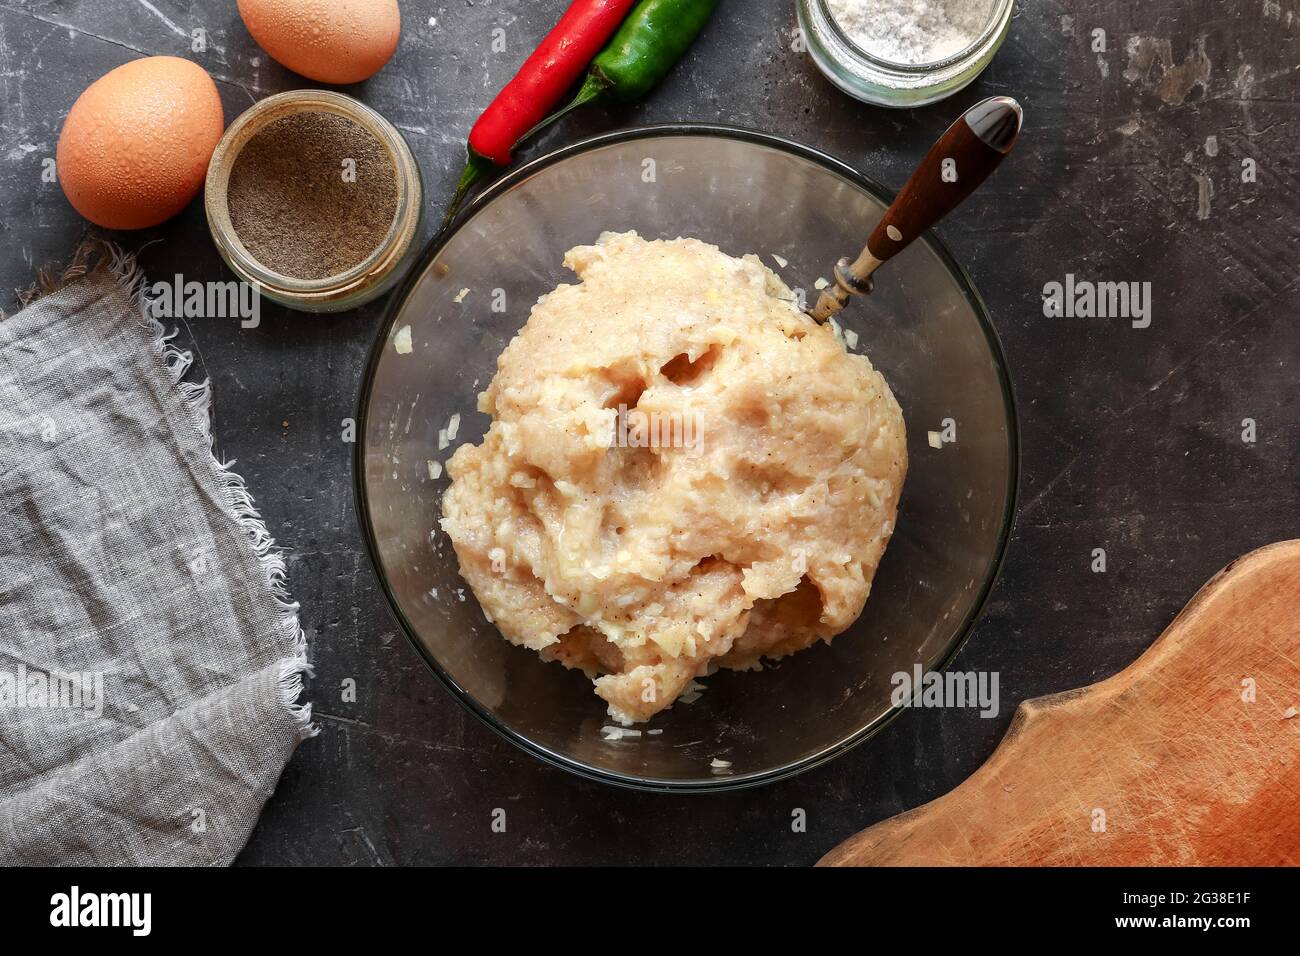 Step-by-step preparation of minced meat for chicken meatballs. Top view. Cooking in the kitchen. Recipe. Stock Photo